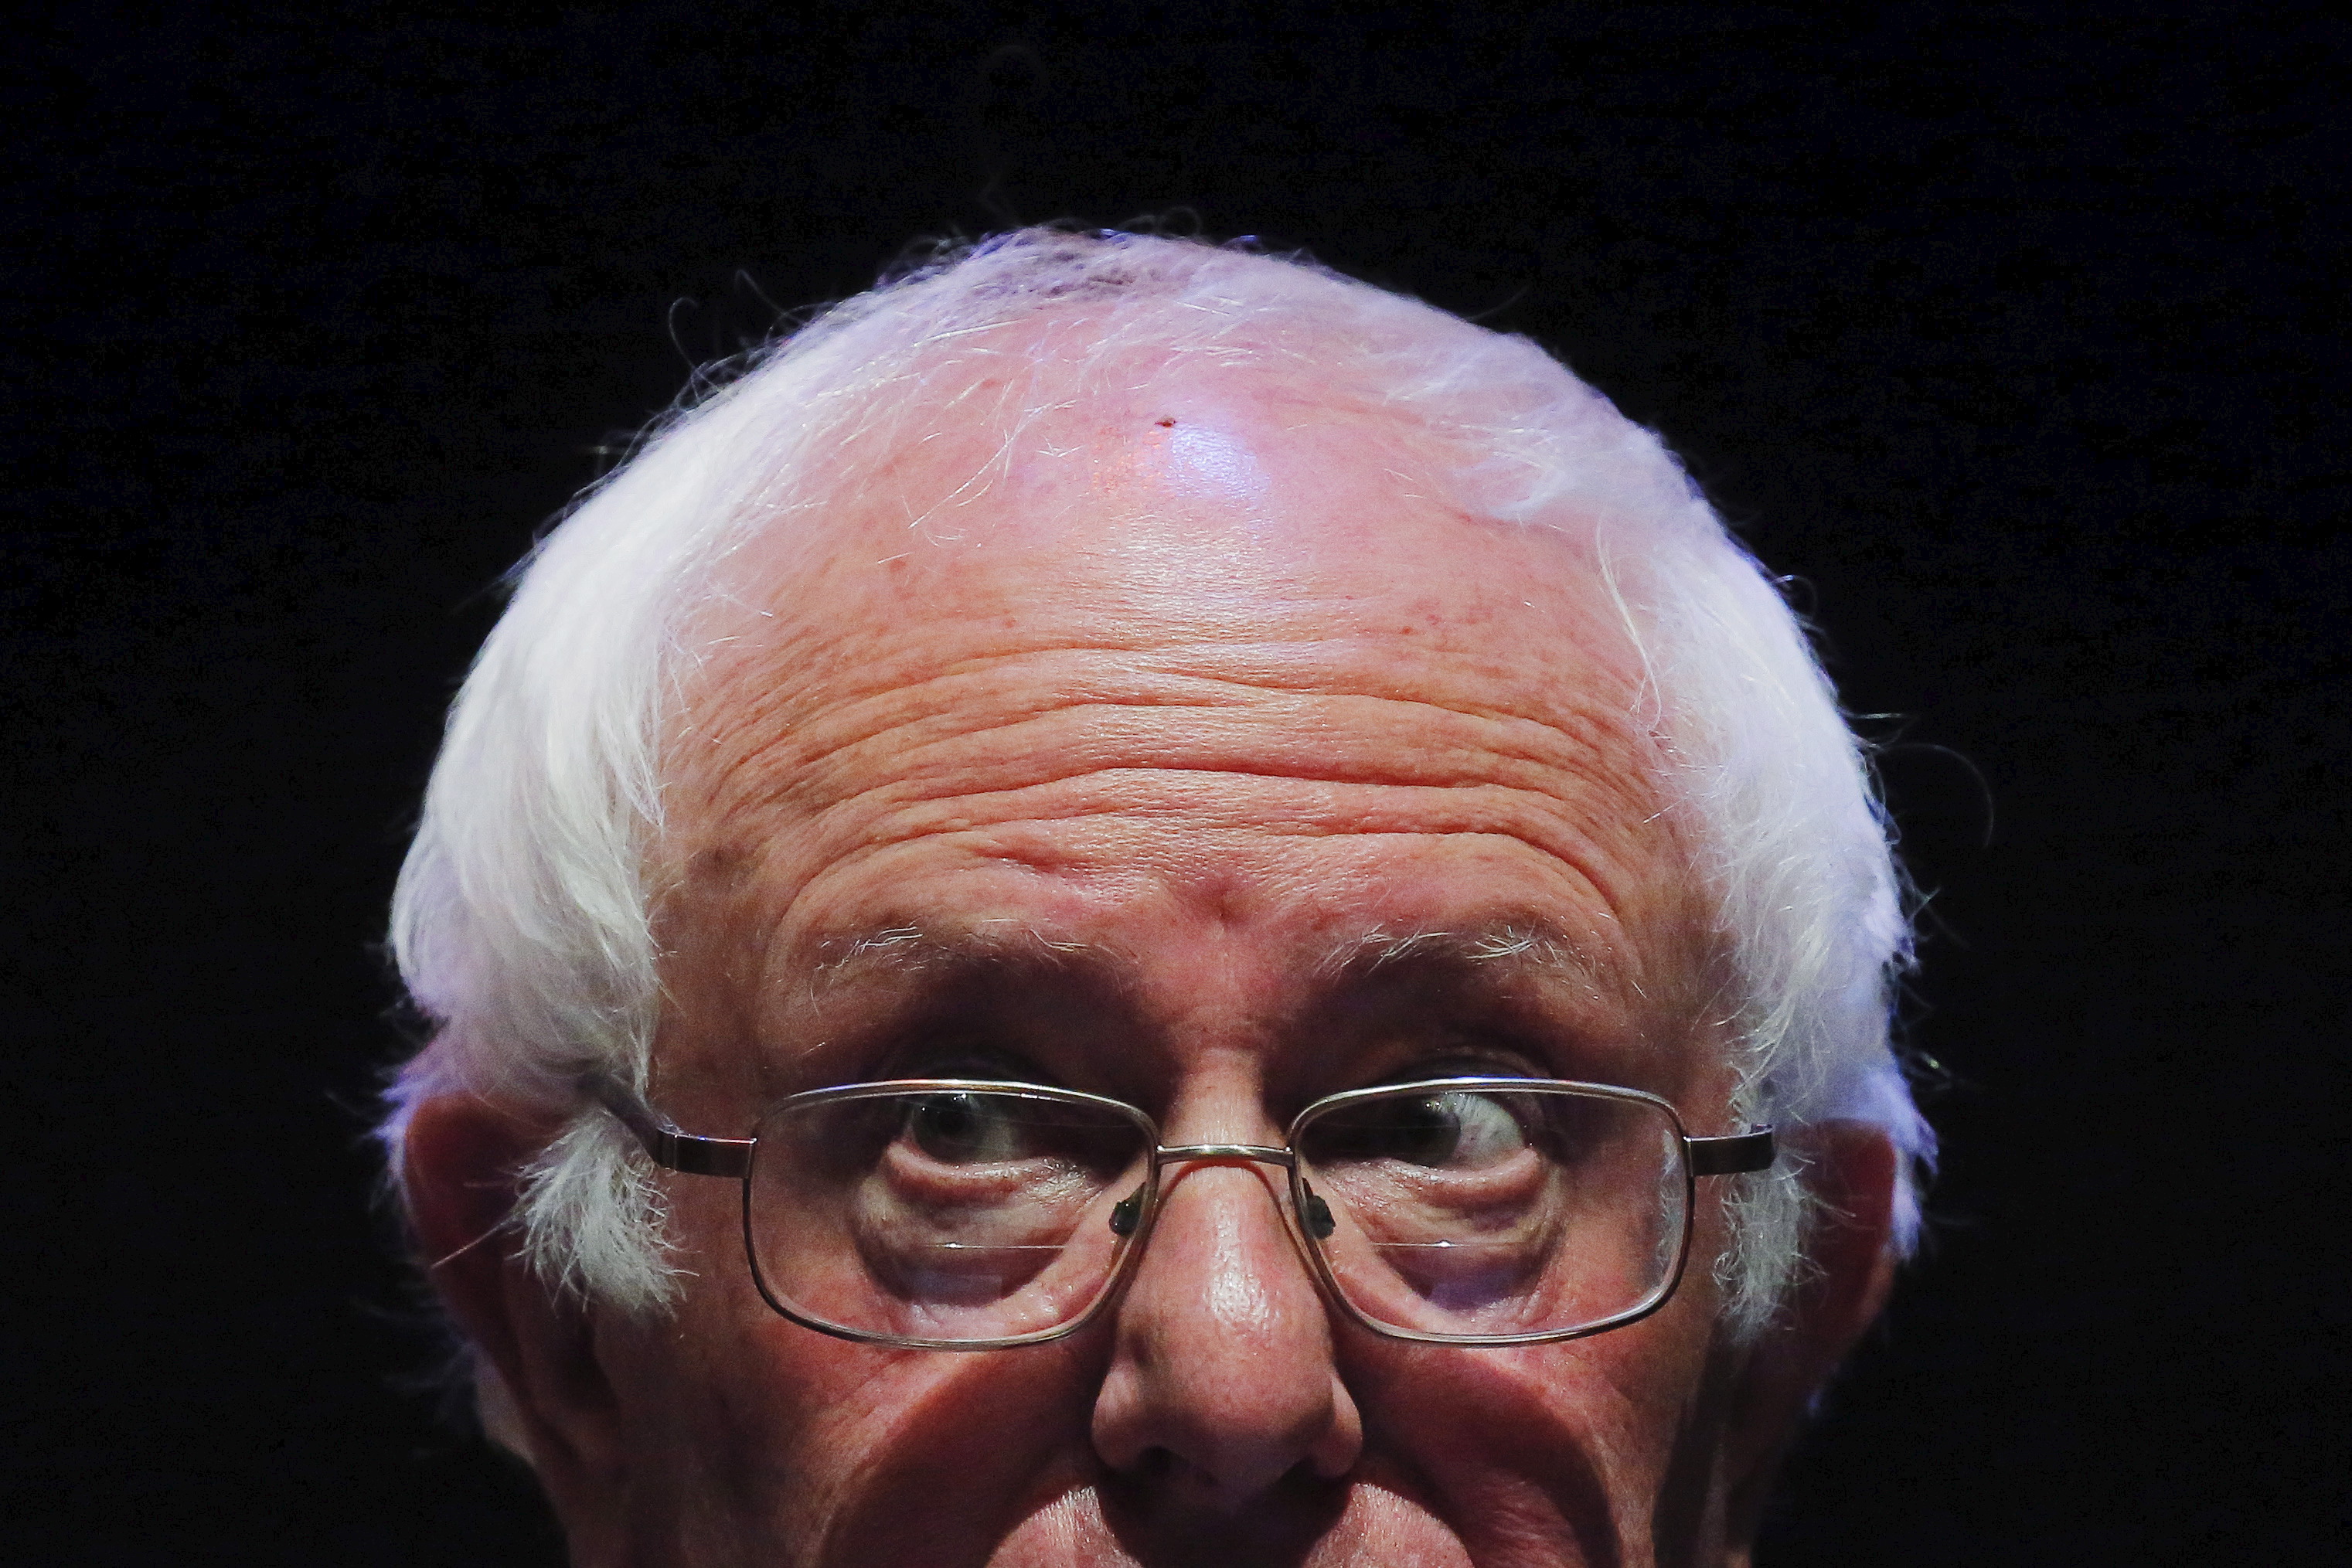 Democratic U.S. presidential candidate Sanders addresses the crowd during a campaign rally in Reading, Pennsylvania